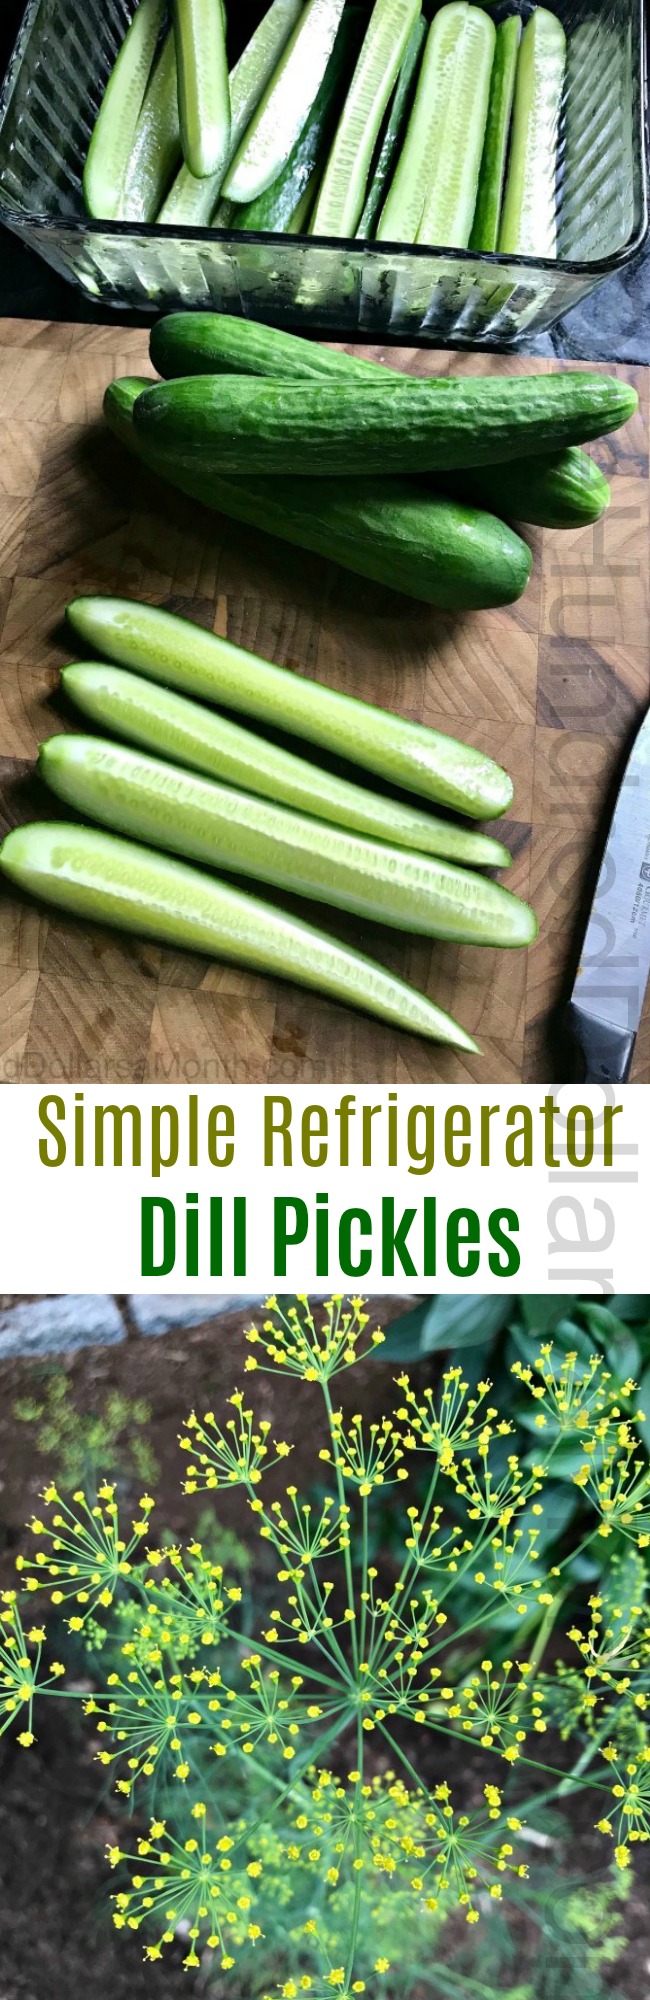 Simple Refrigerator Dill Pickles